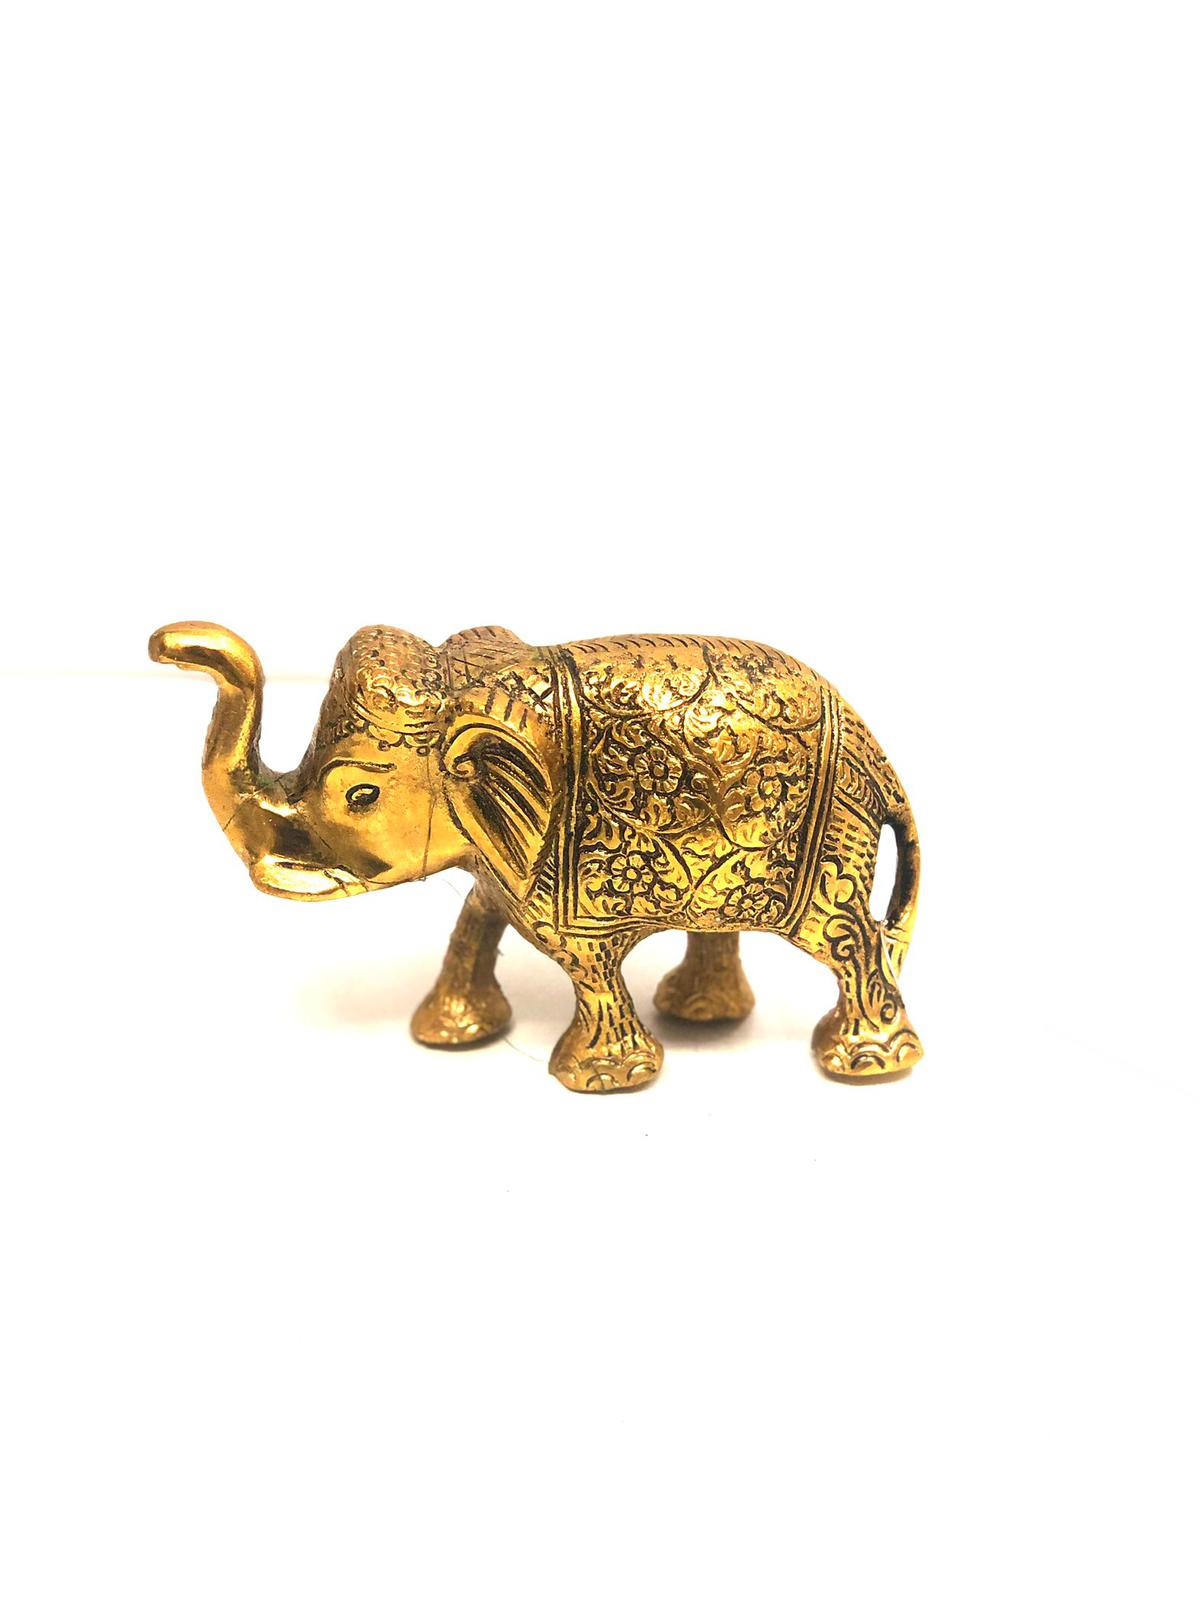 Elephant Metal Carving Handcrafted Up Trunk Mighty Animal Décor Tamrapatra